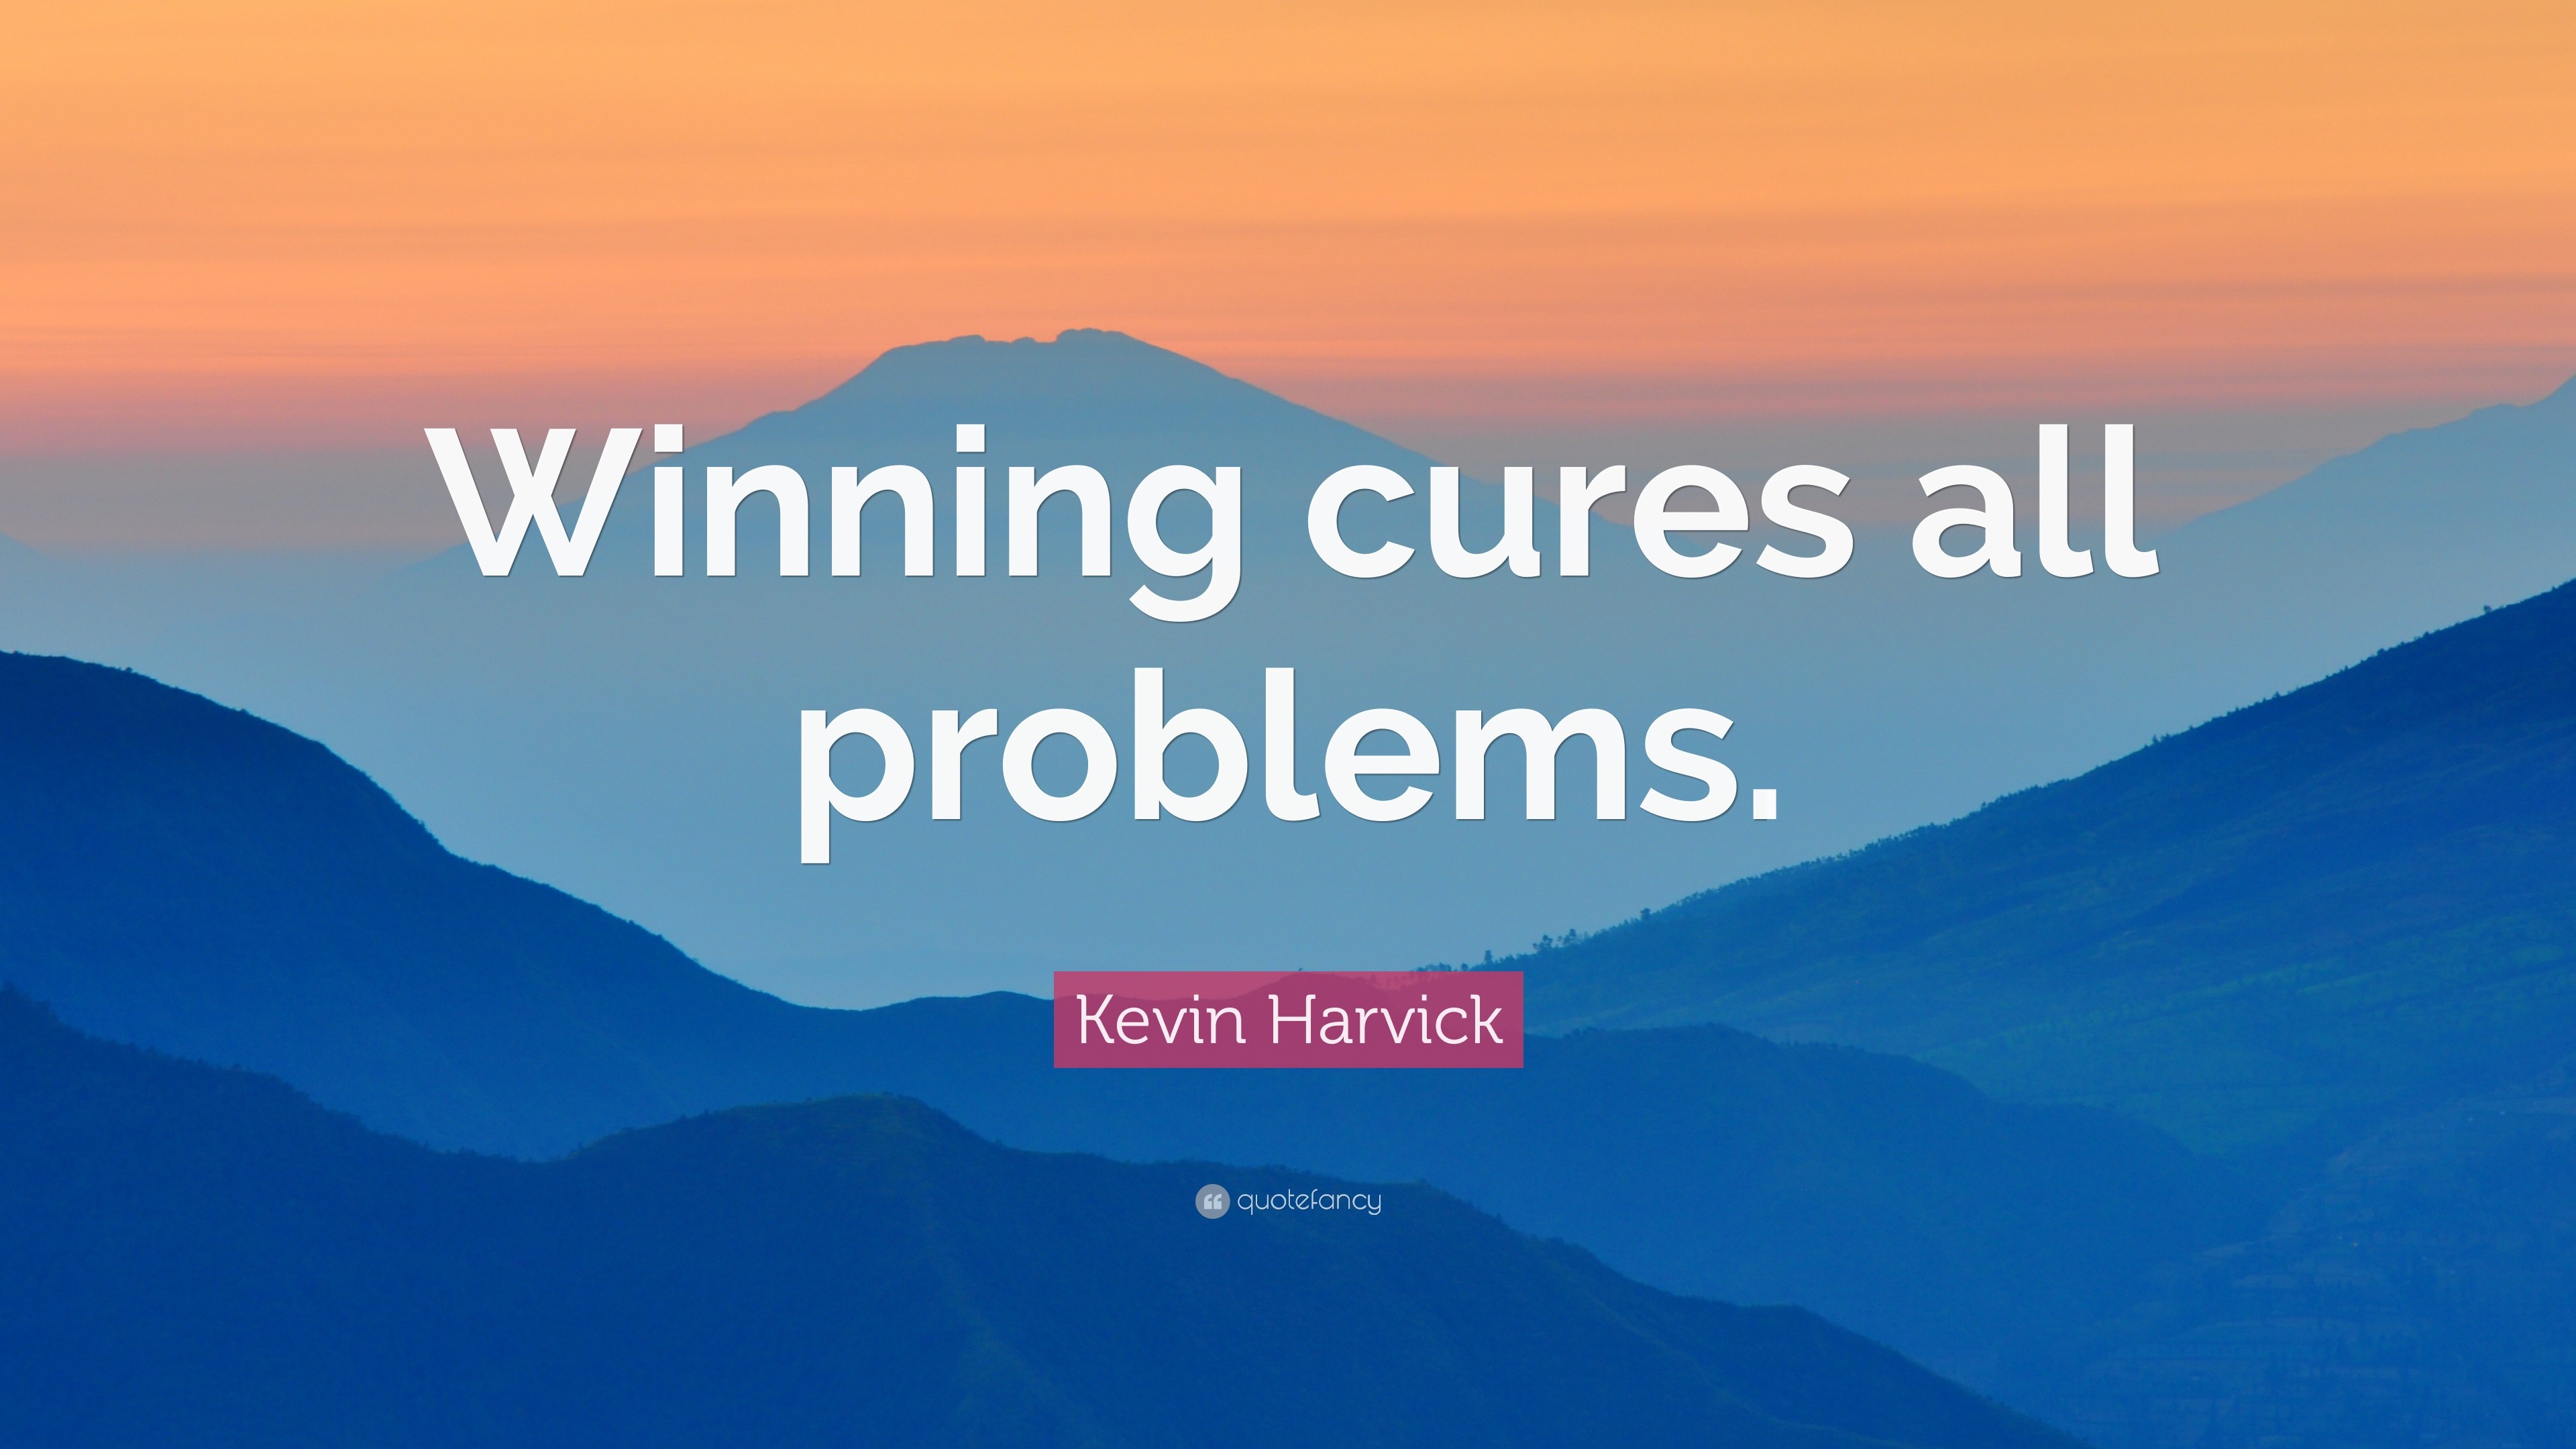 3840x2160 Kevin Harvick Quote: “Winning cures all problems.”